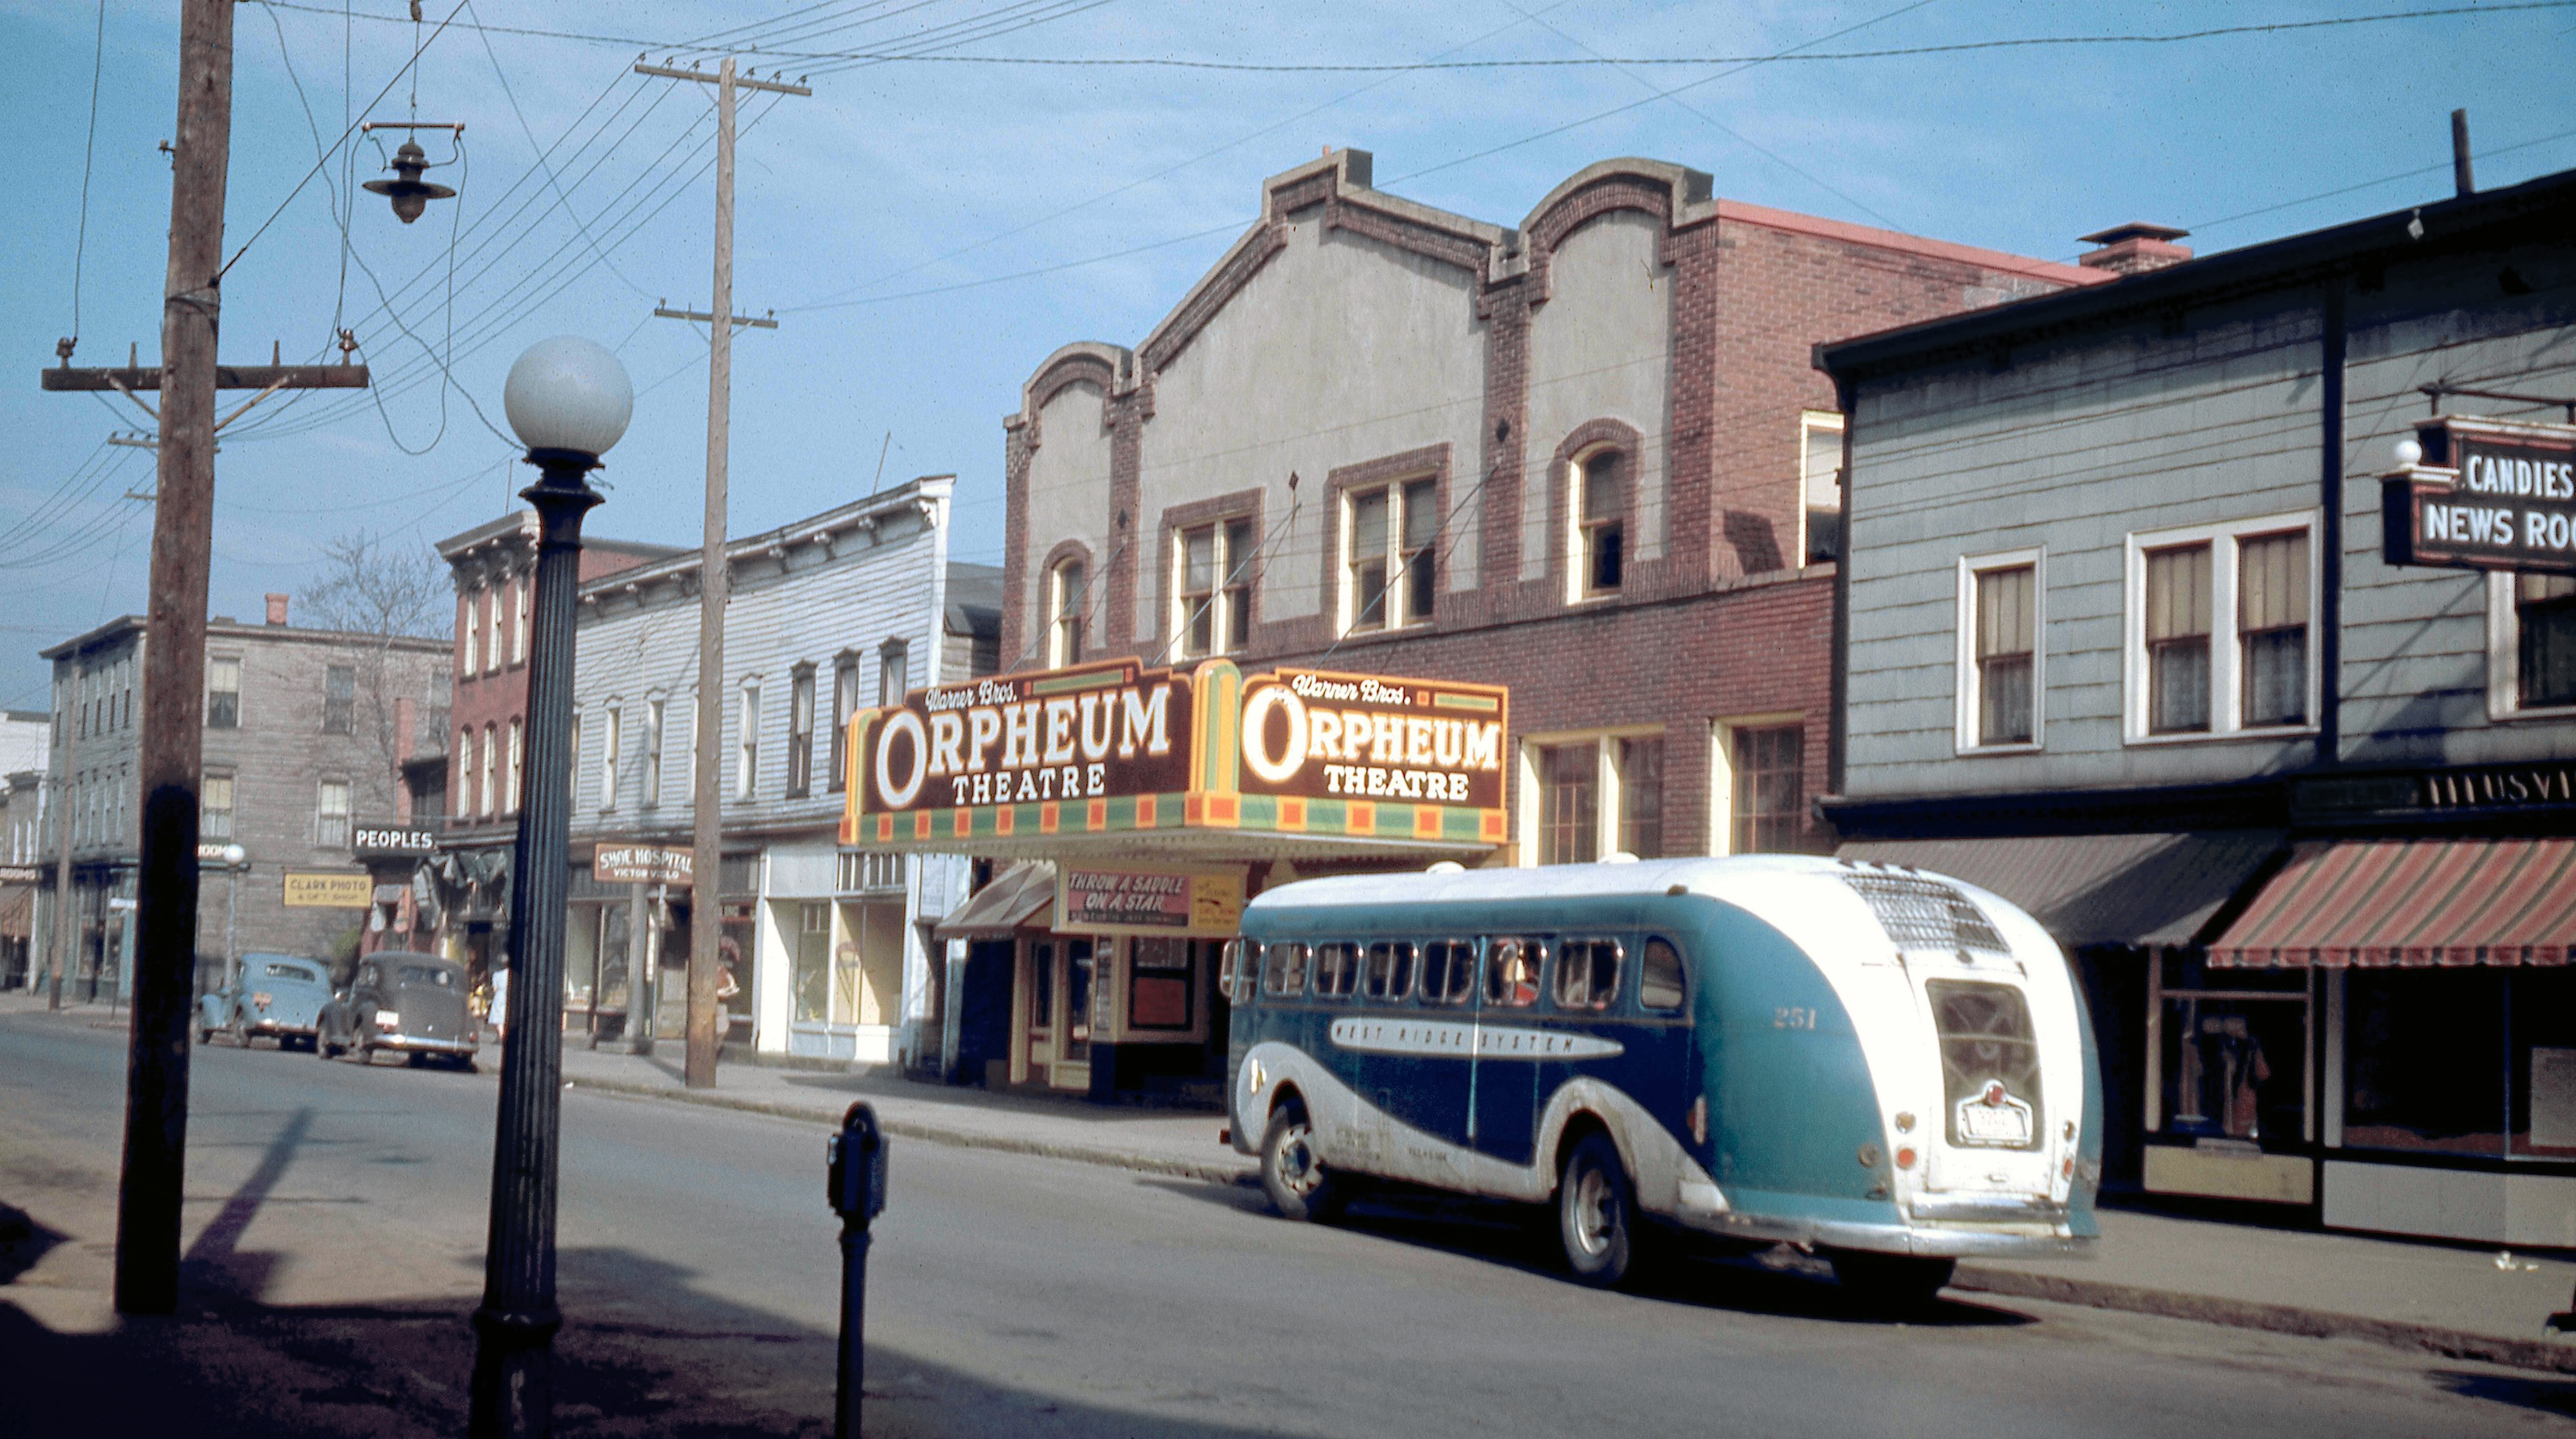 Titusville, Pennsylvania, 1946. West Central Avenue as seen from the Archer Camera Shop, showing a newsstand, bus stop and the Orpheum Theatre. The movie playing is "Throw a Saddle on a Star," which is how I was able to date this Kodachrome slide taken by my grandfather from his camera shop that he and my grandmother owned and operated from 1929 to 1961. View full size.